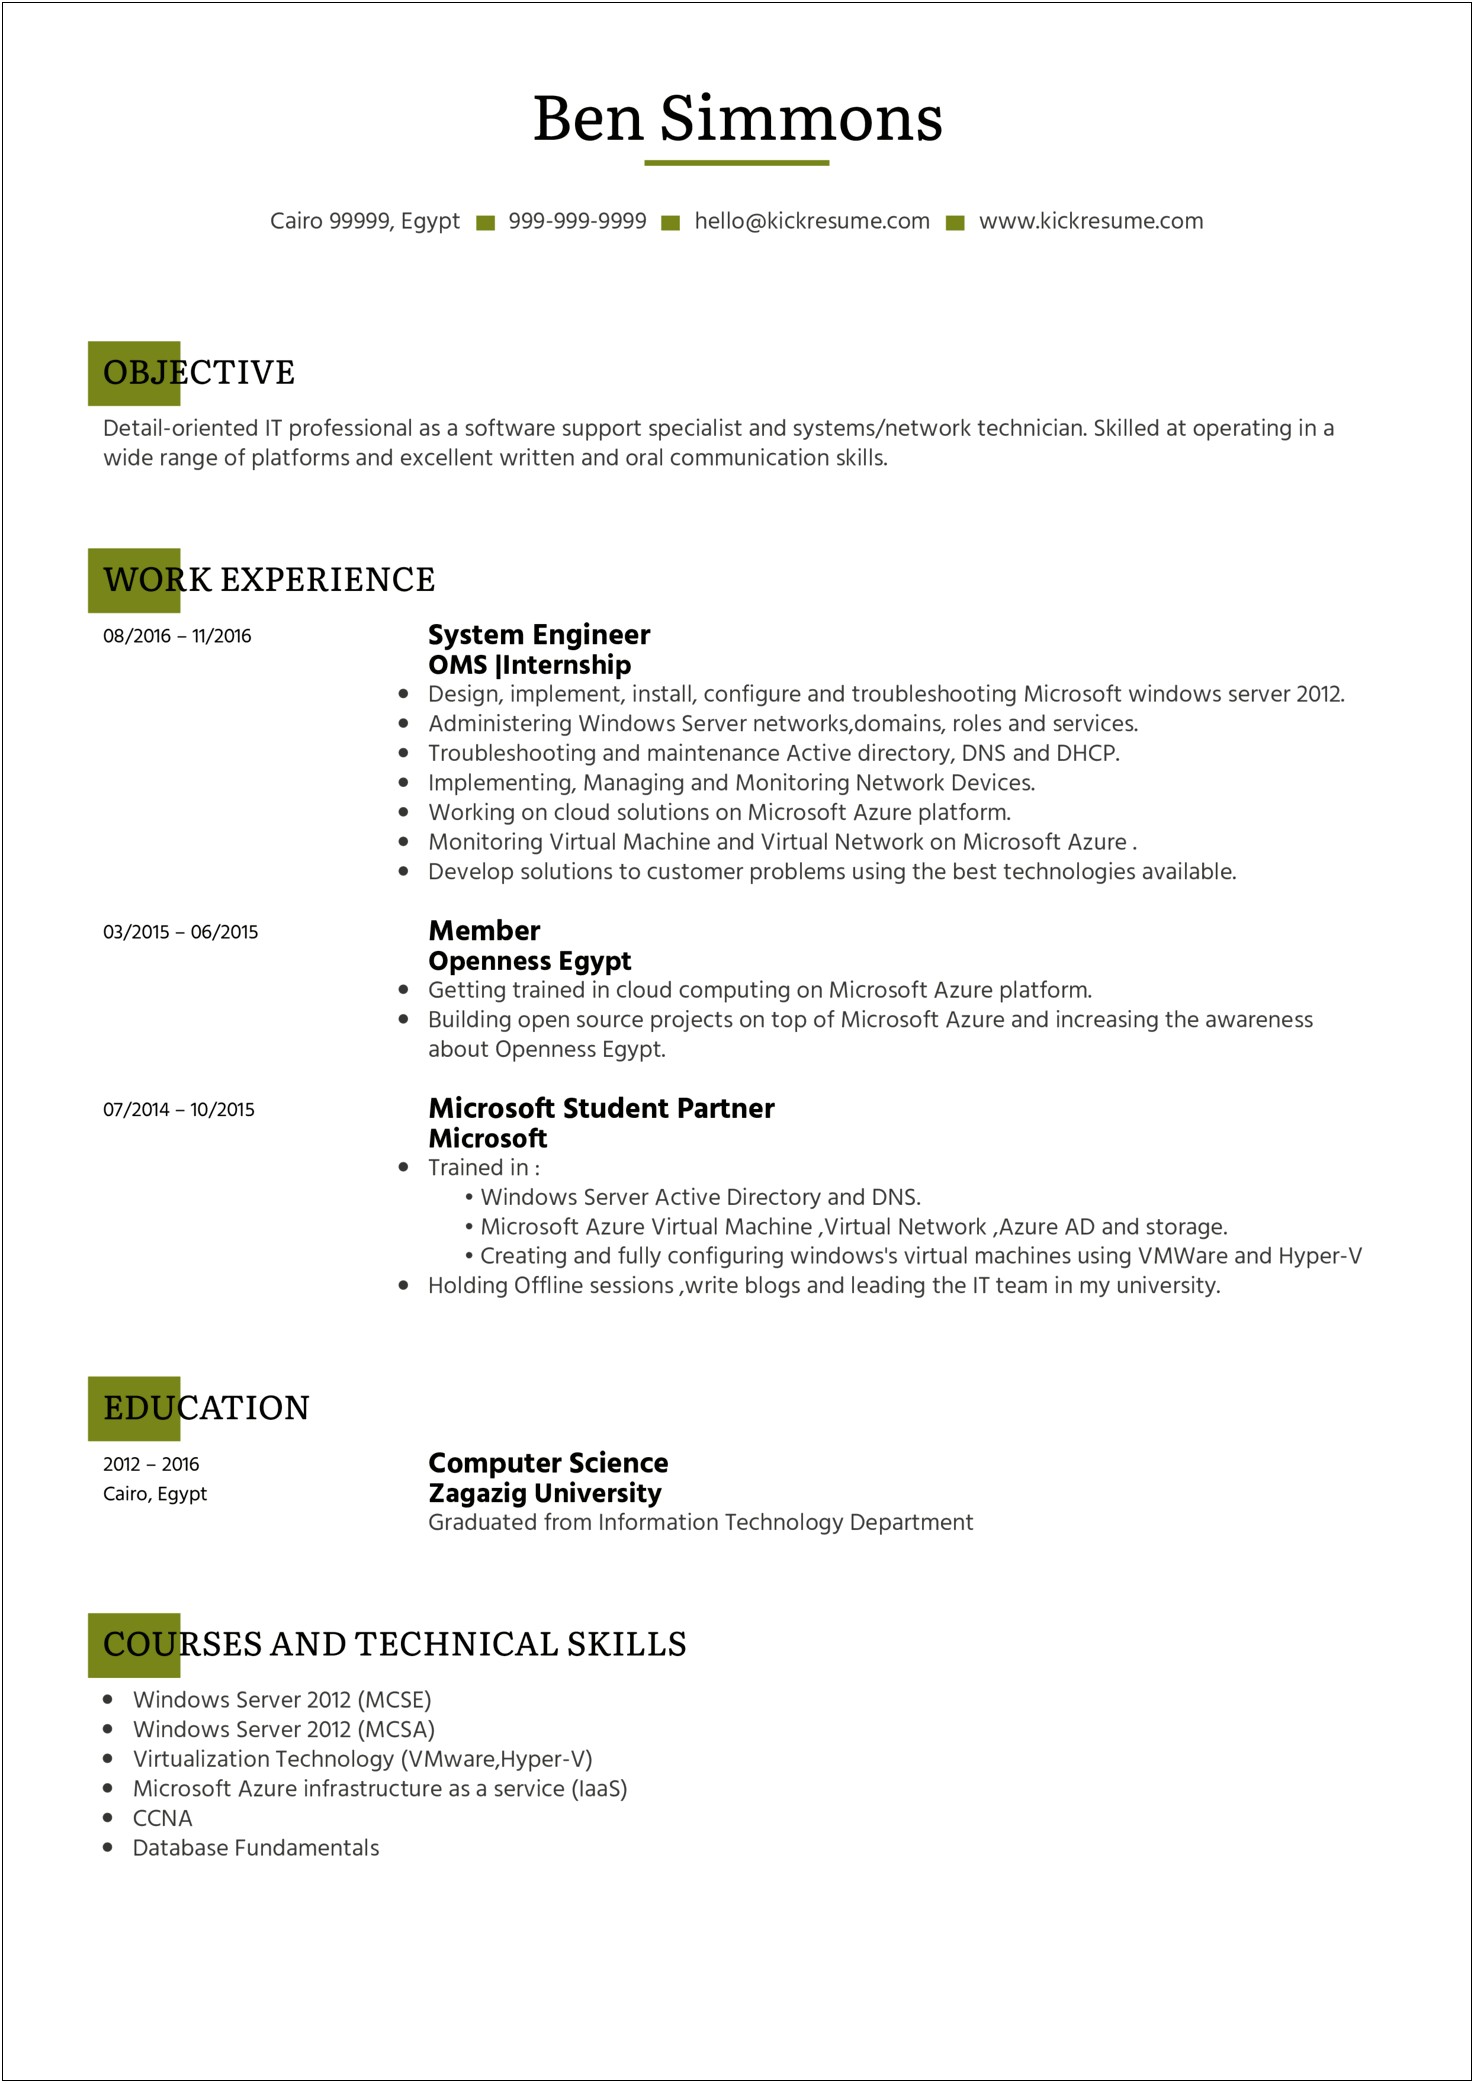 Direct Support Professional Skills Resume